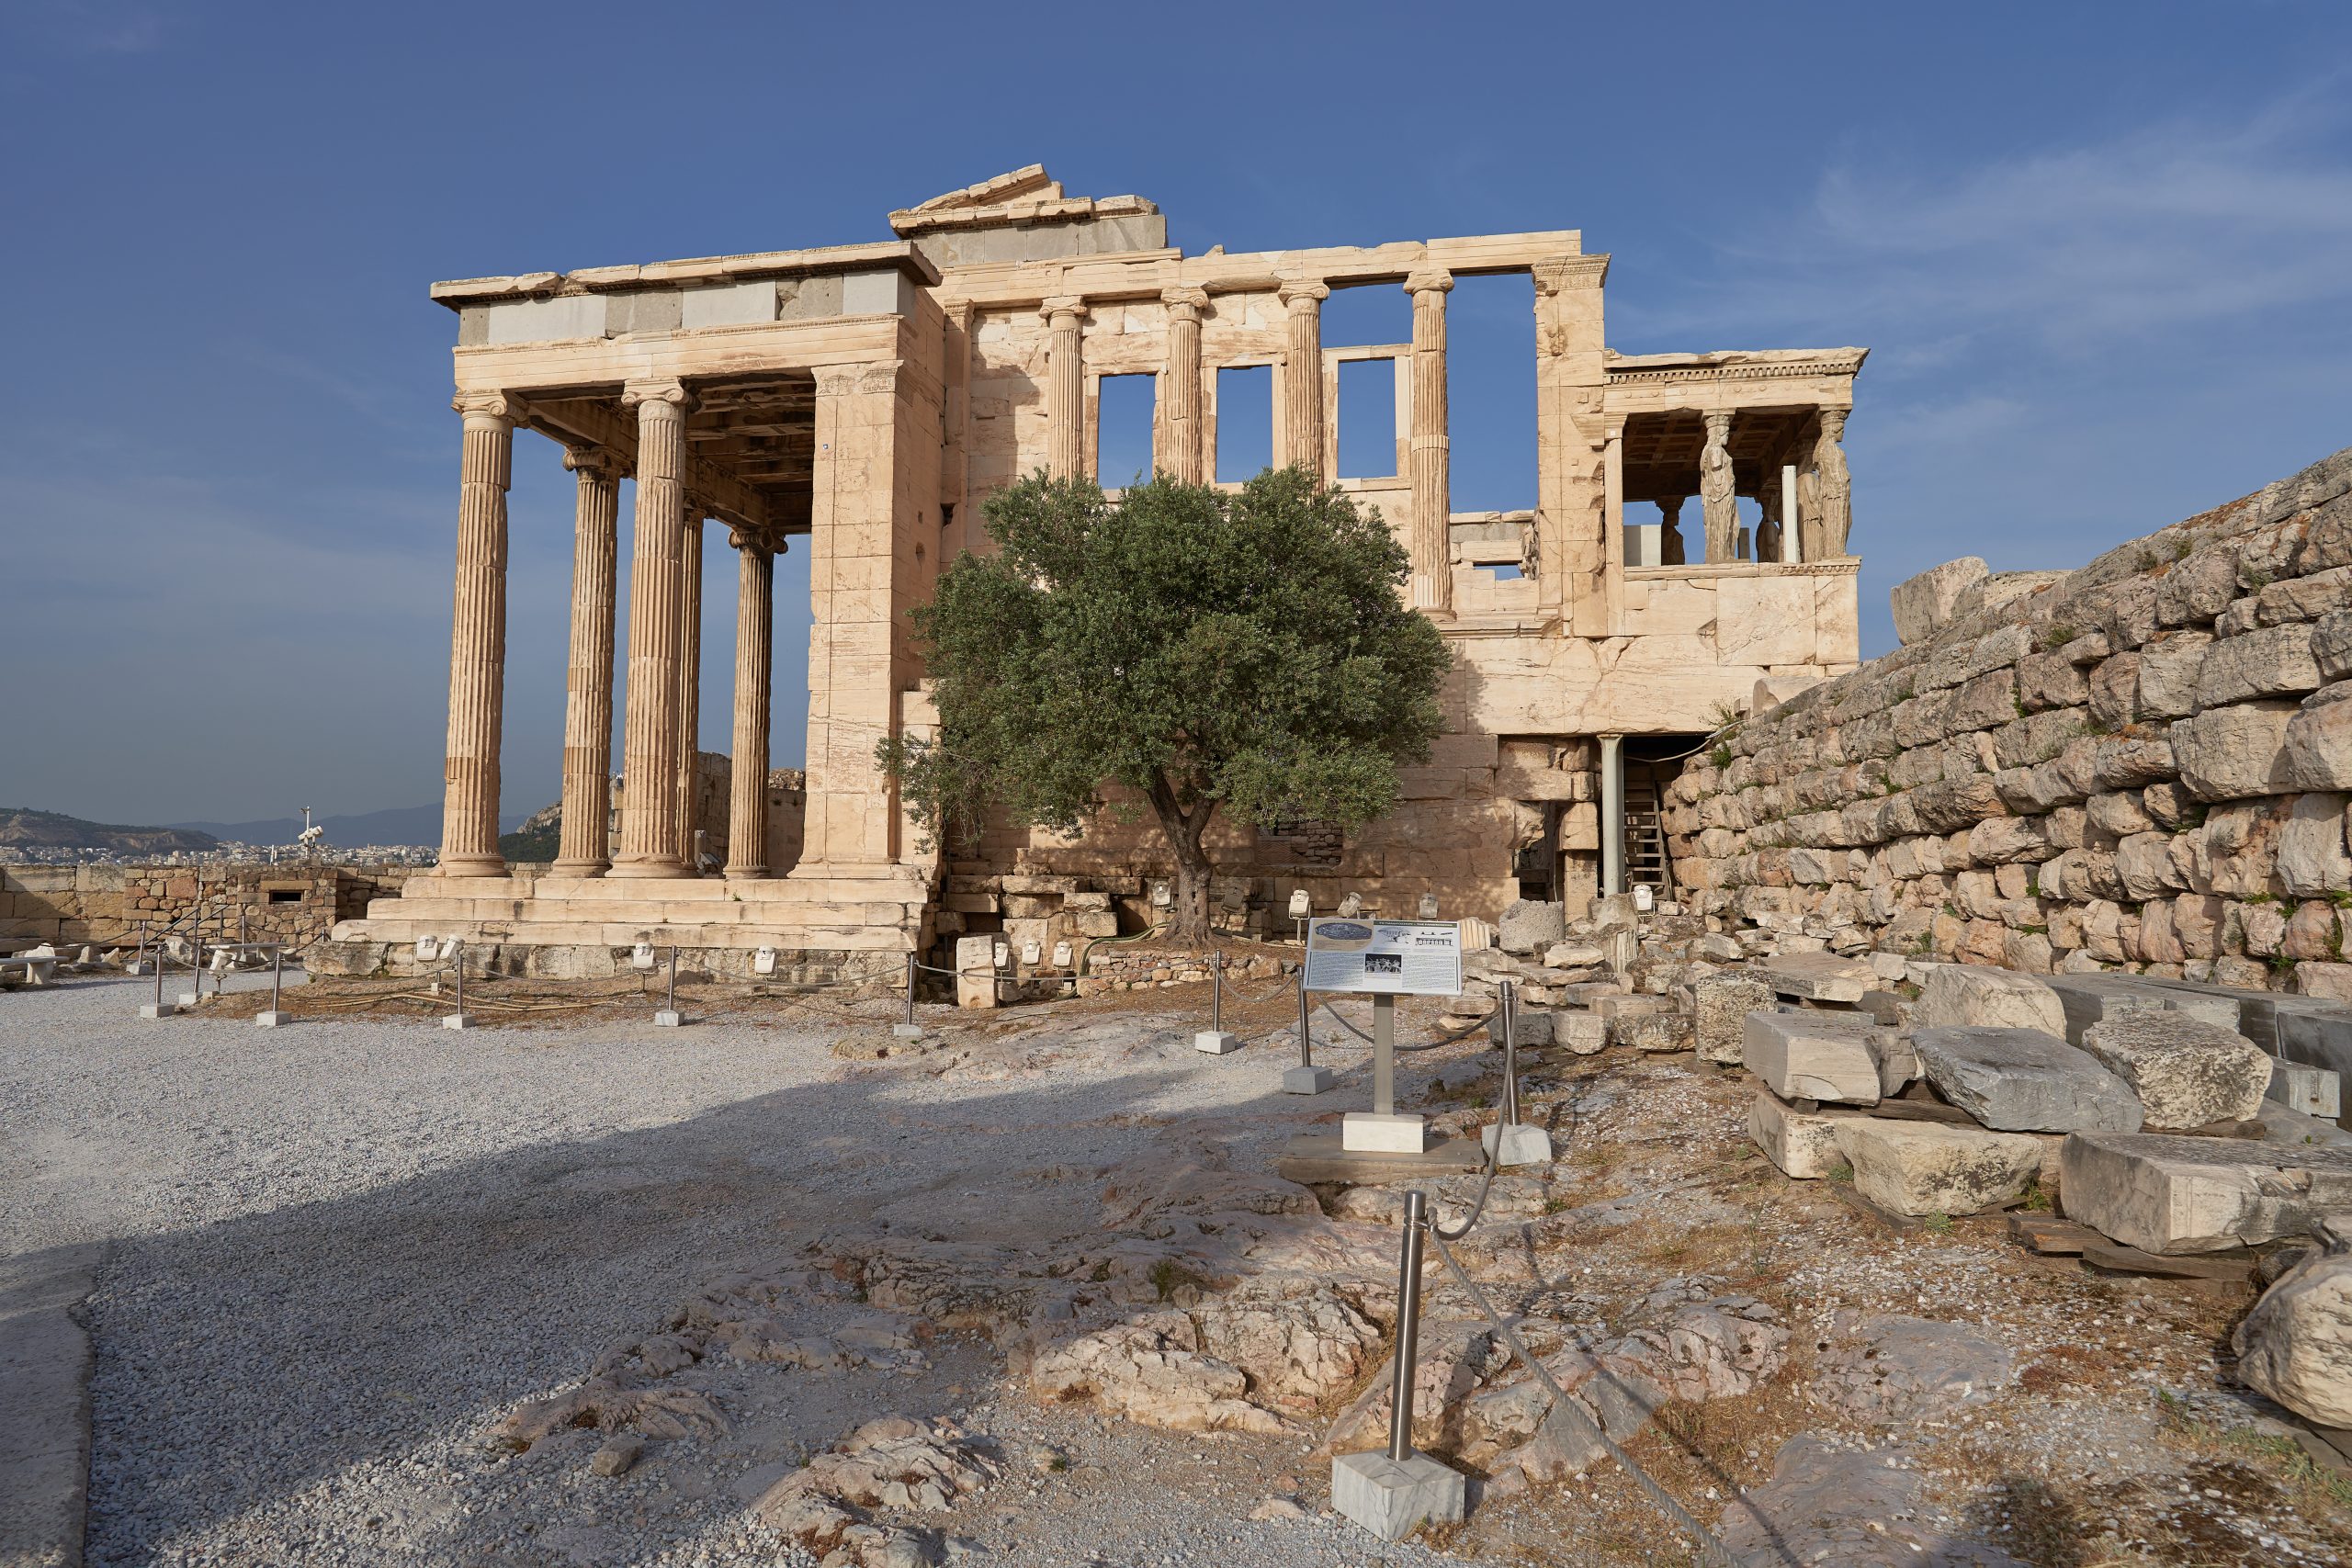 Archaeological remains of the Erechtheion. The side view shows the columned portico and two-story columned building. An olive tree stands out front.